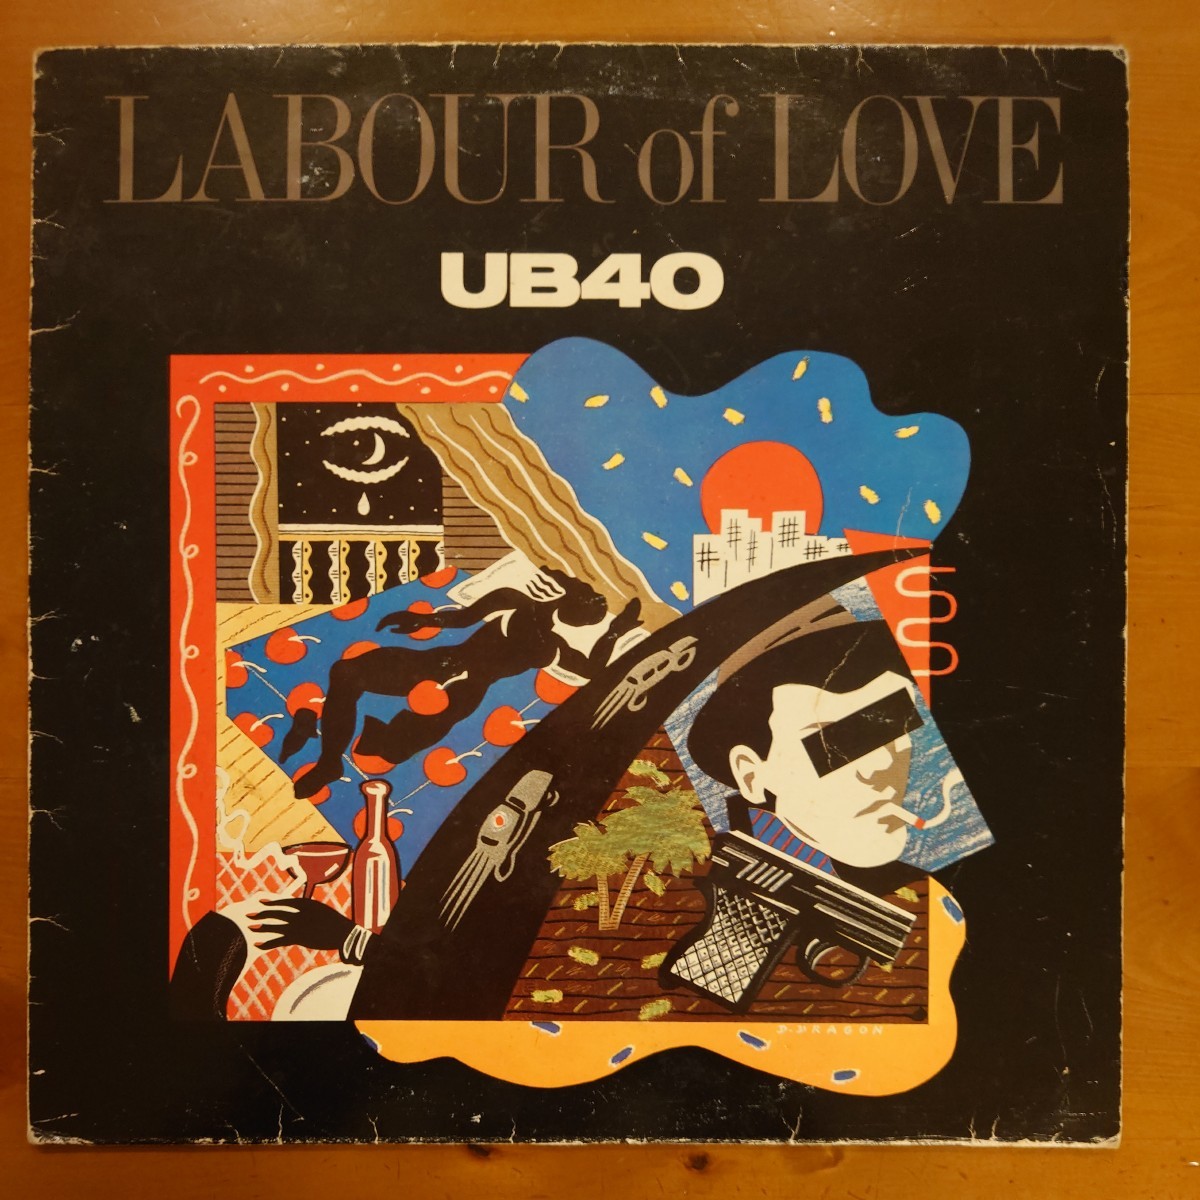 LP UB40 / Labour Of Love / DEP International (LP DEP 5) / Red Red Wine , Cherry Oh Baby , Many Rivers To Cross 等 収録アルバムの画像1